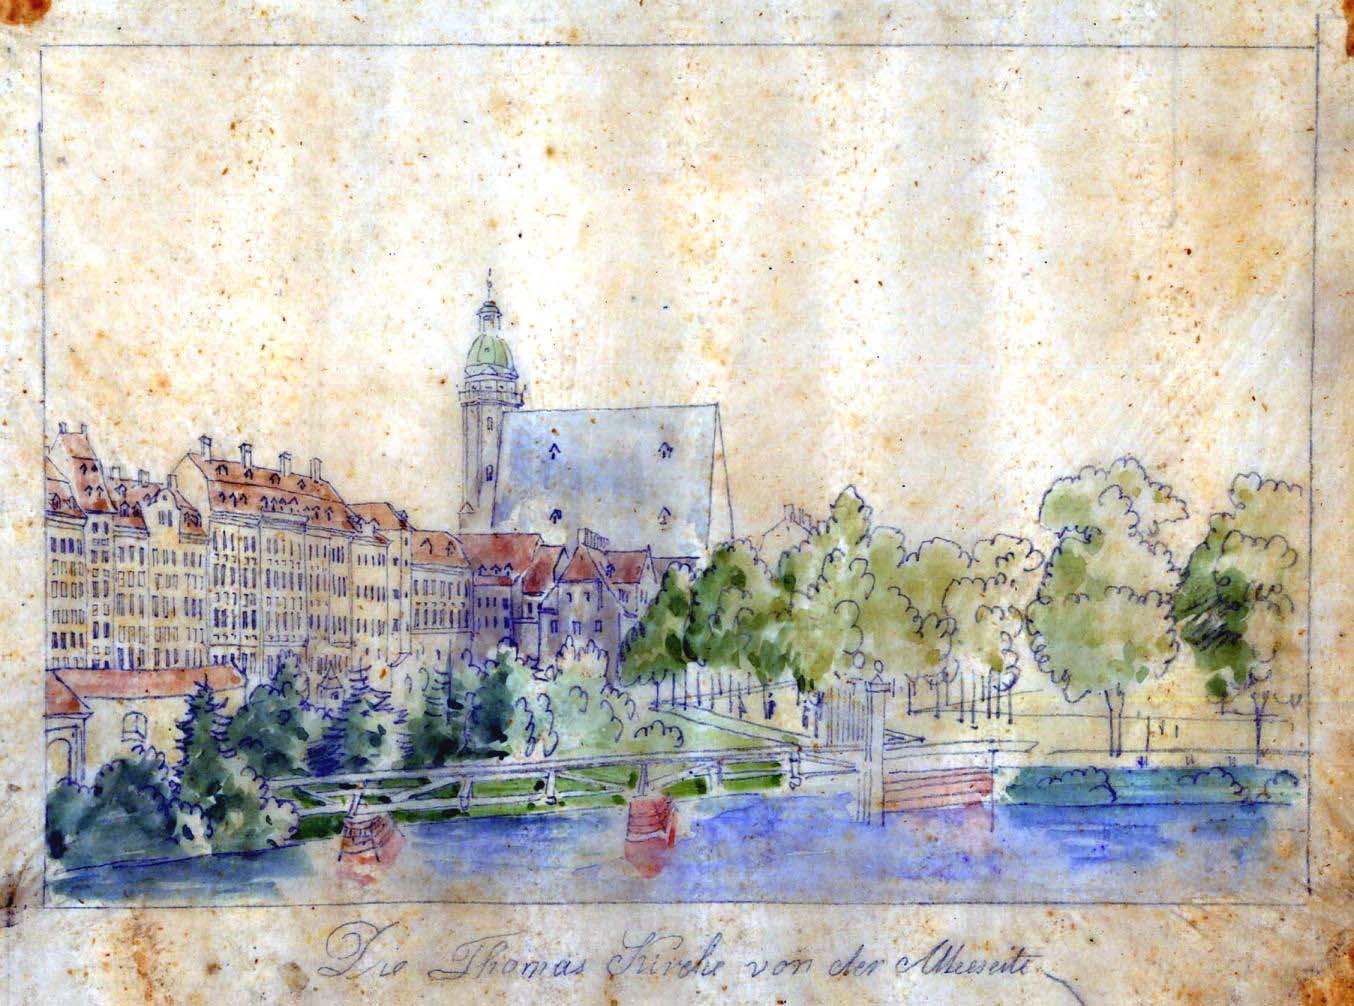 Water colour painting of the Thomaskirche in Leipzig by Louis Braun, around 1870. Louis Braun was a German painter, mostly known for his battlescenes, especially those of the Franco-Prussian war of 1870-1871.